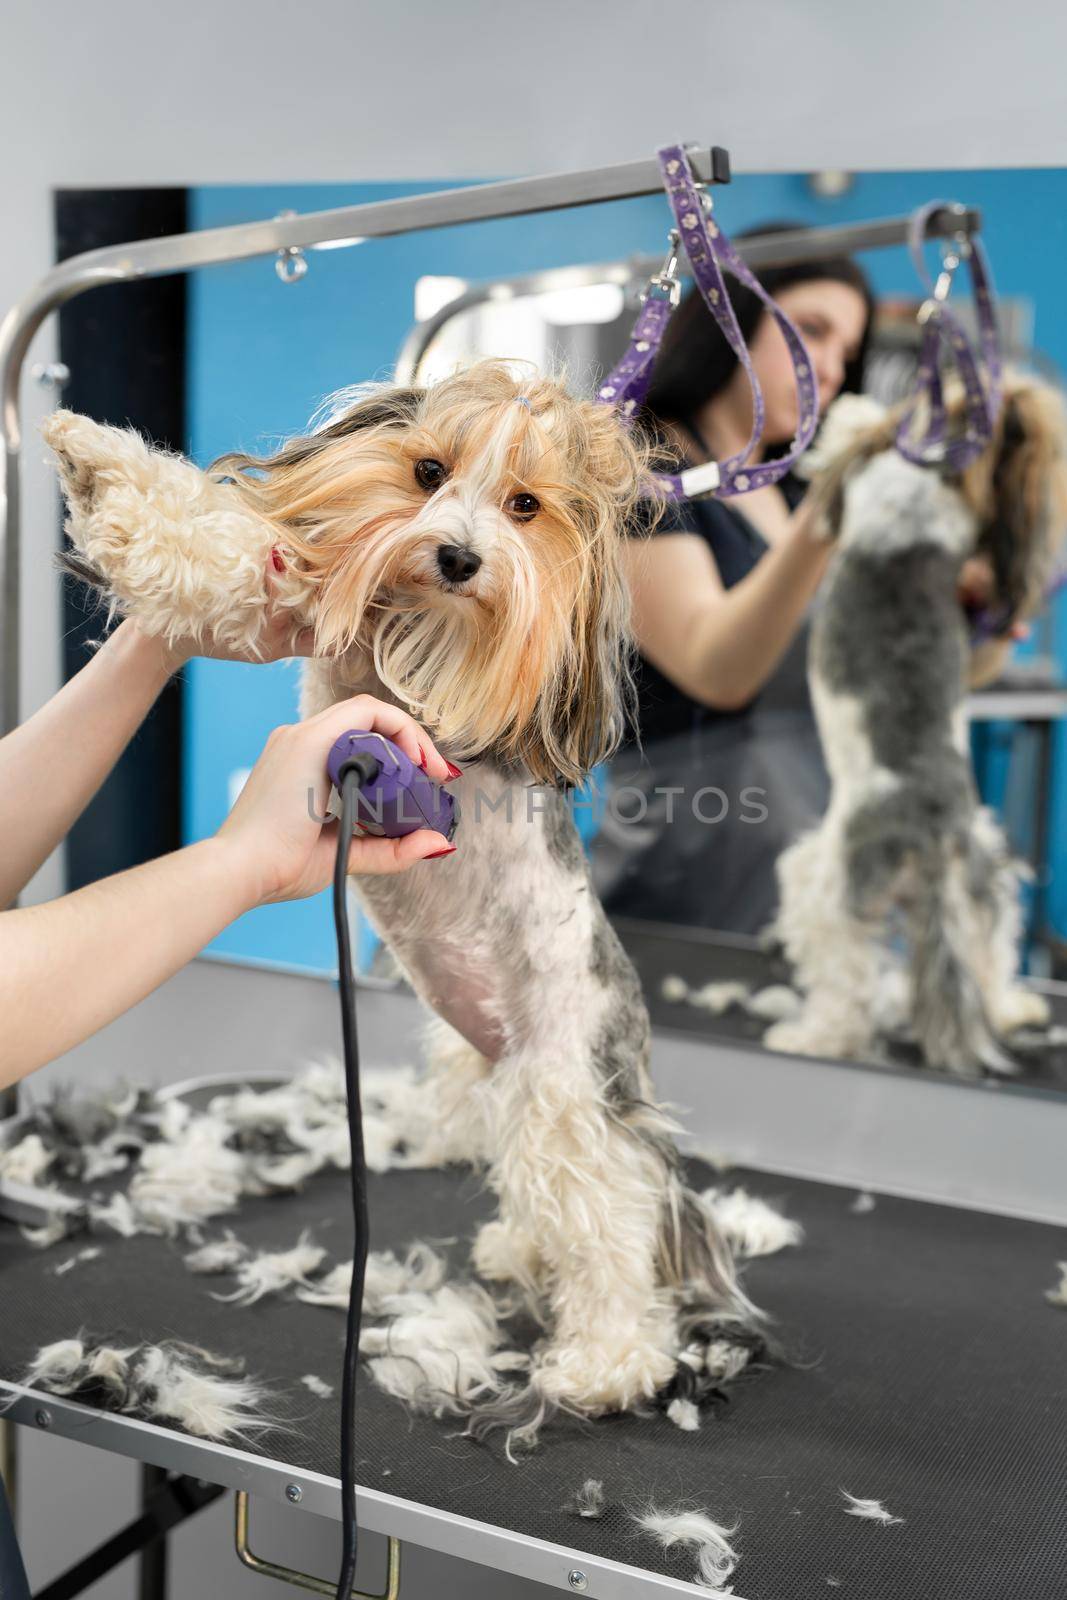 A groomer shaves a dog's fur with a razor in a barber shop.